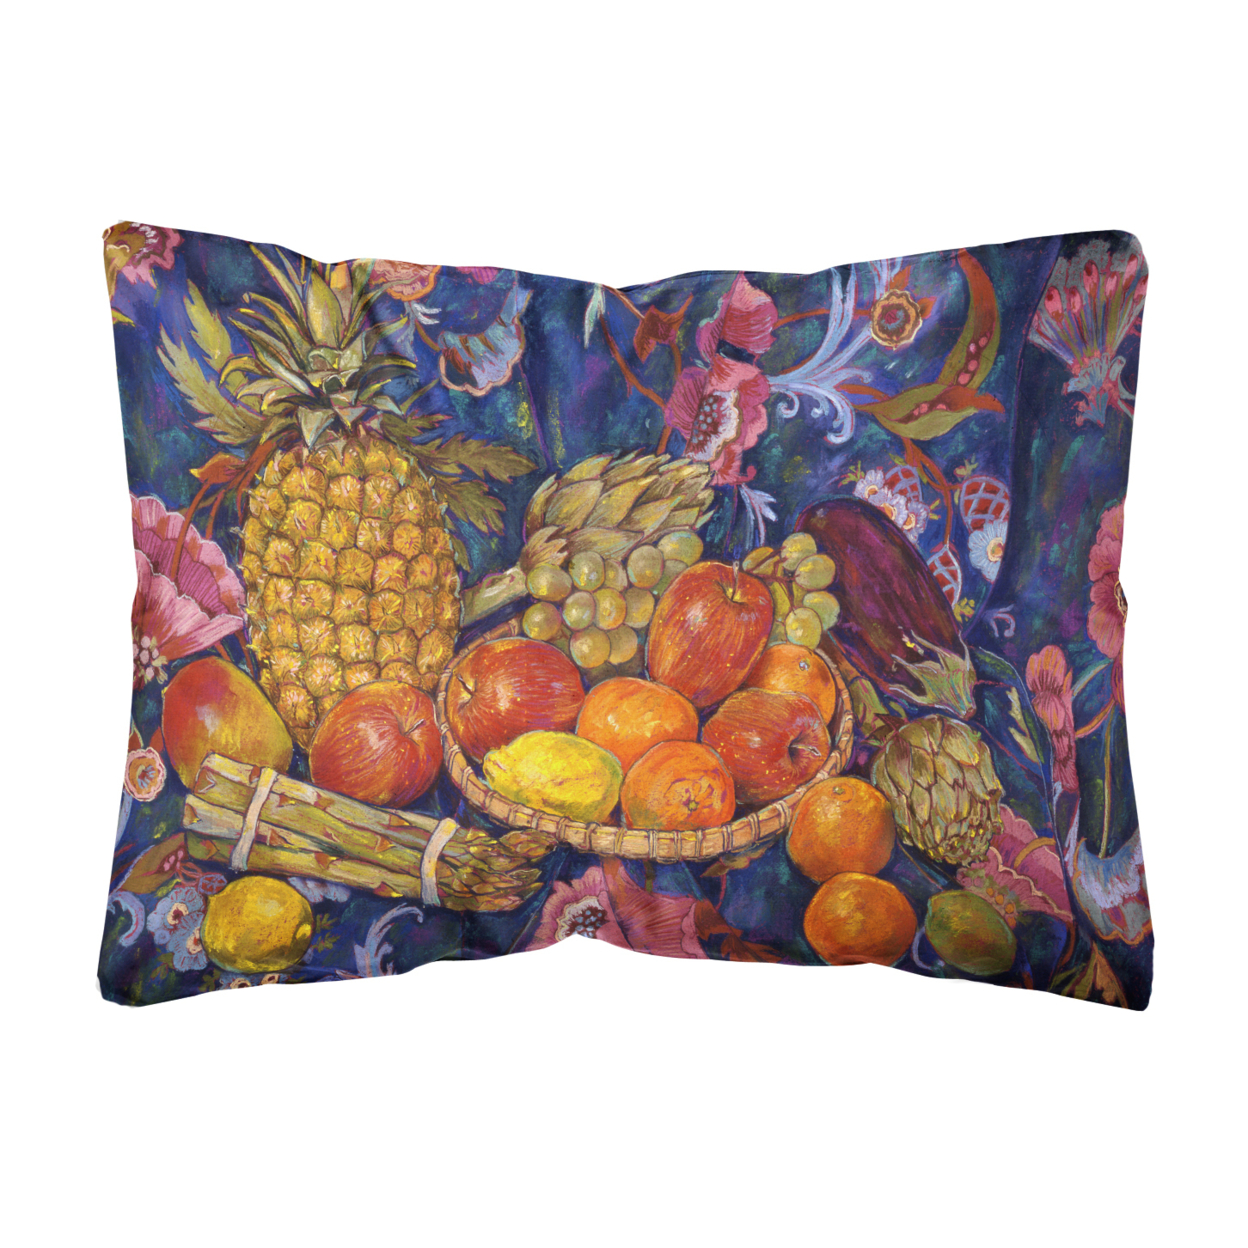 Carolines Treasures DND0018PW1216 Fruit and Vegetables by Neil Drury Canvas Fabric Decorative Pillow, 12H x16W, - image 1 of 3